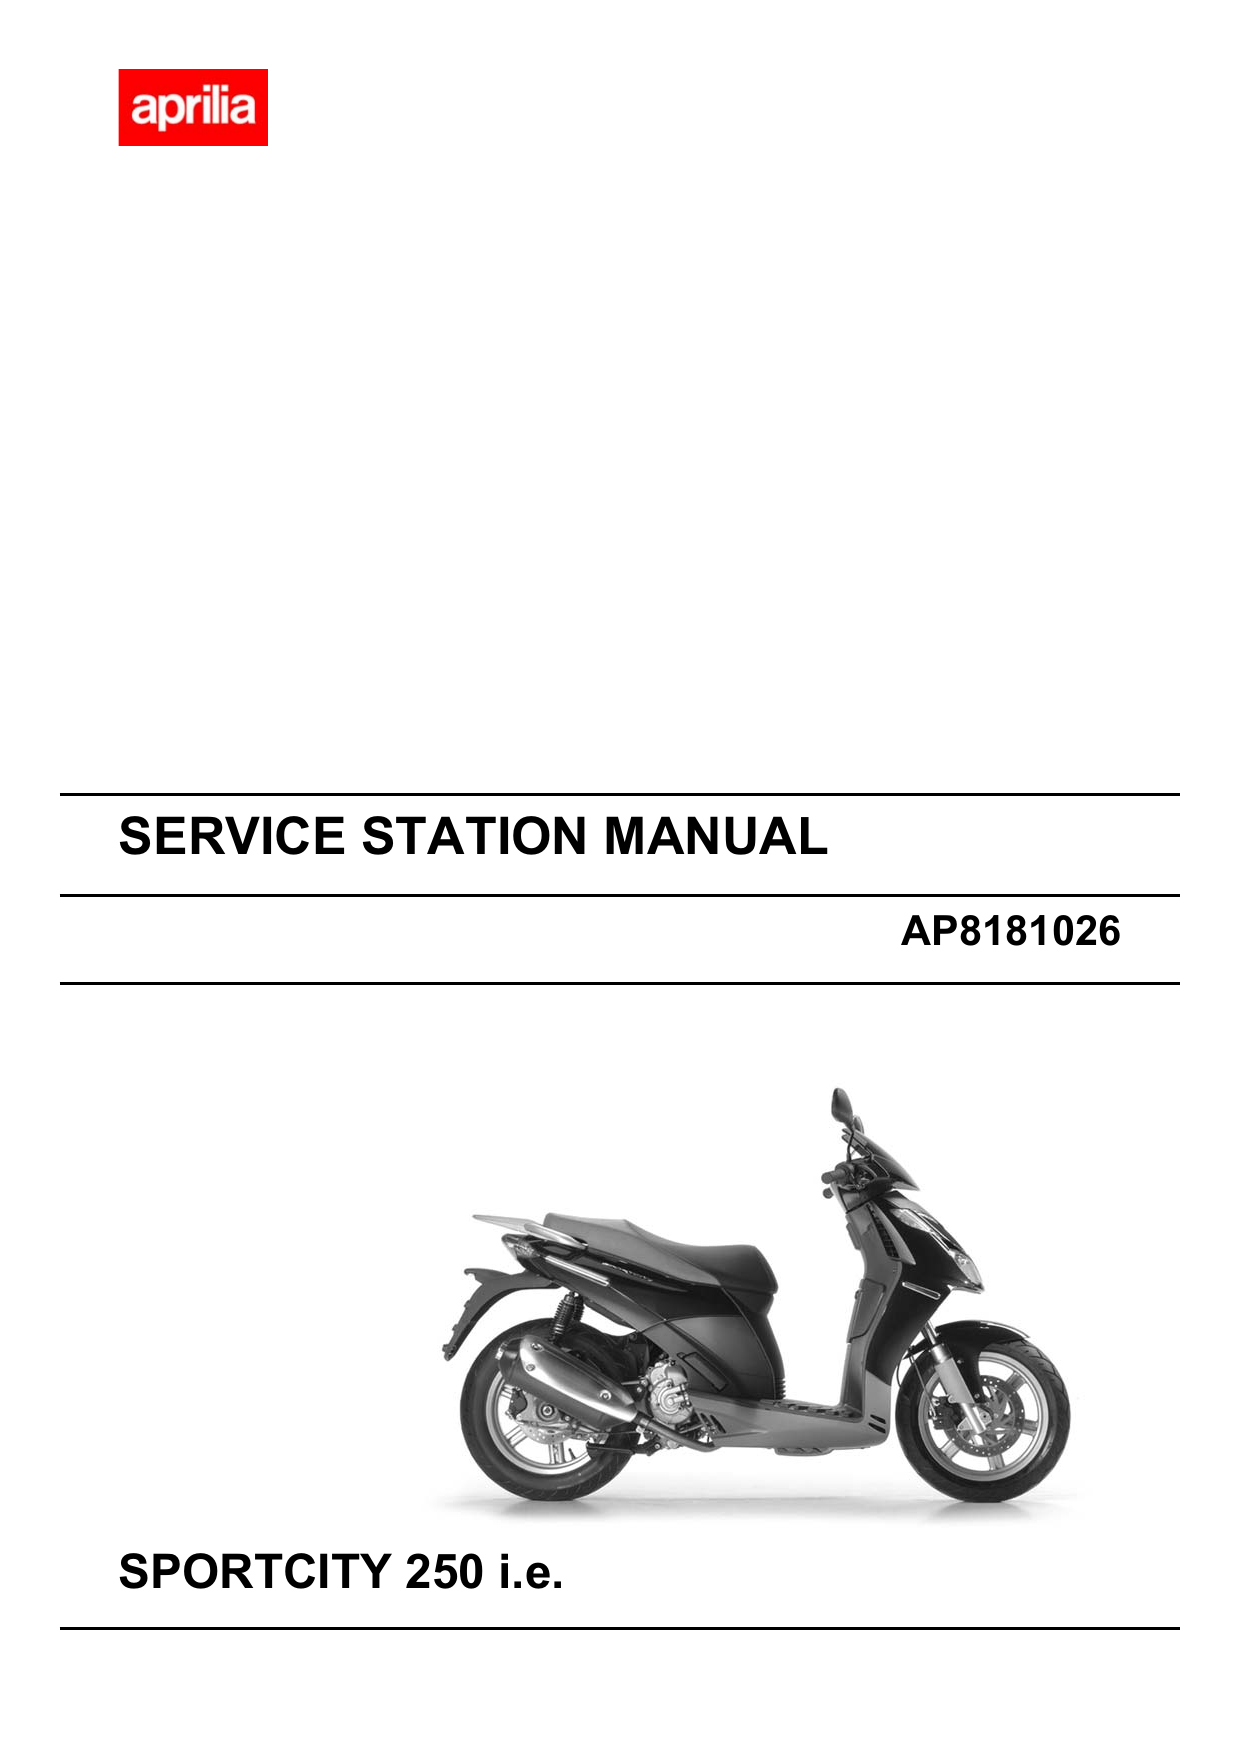 Aprilia Sportcity 250 ie, scooter service station manual Preview image 1